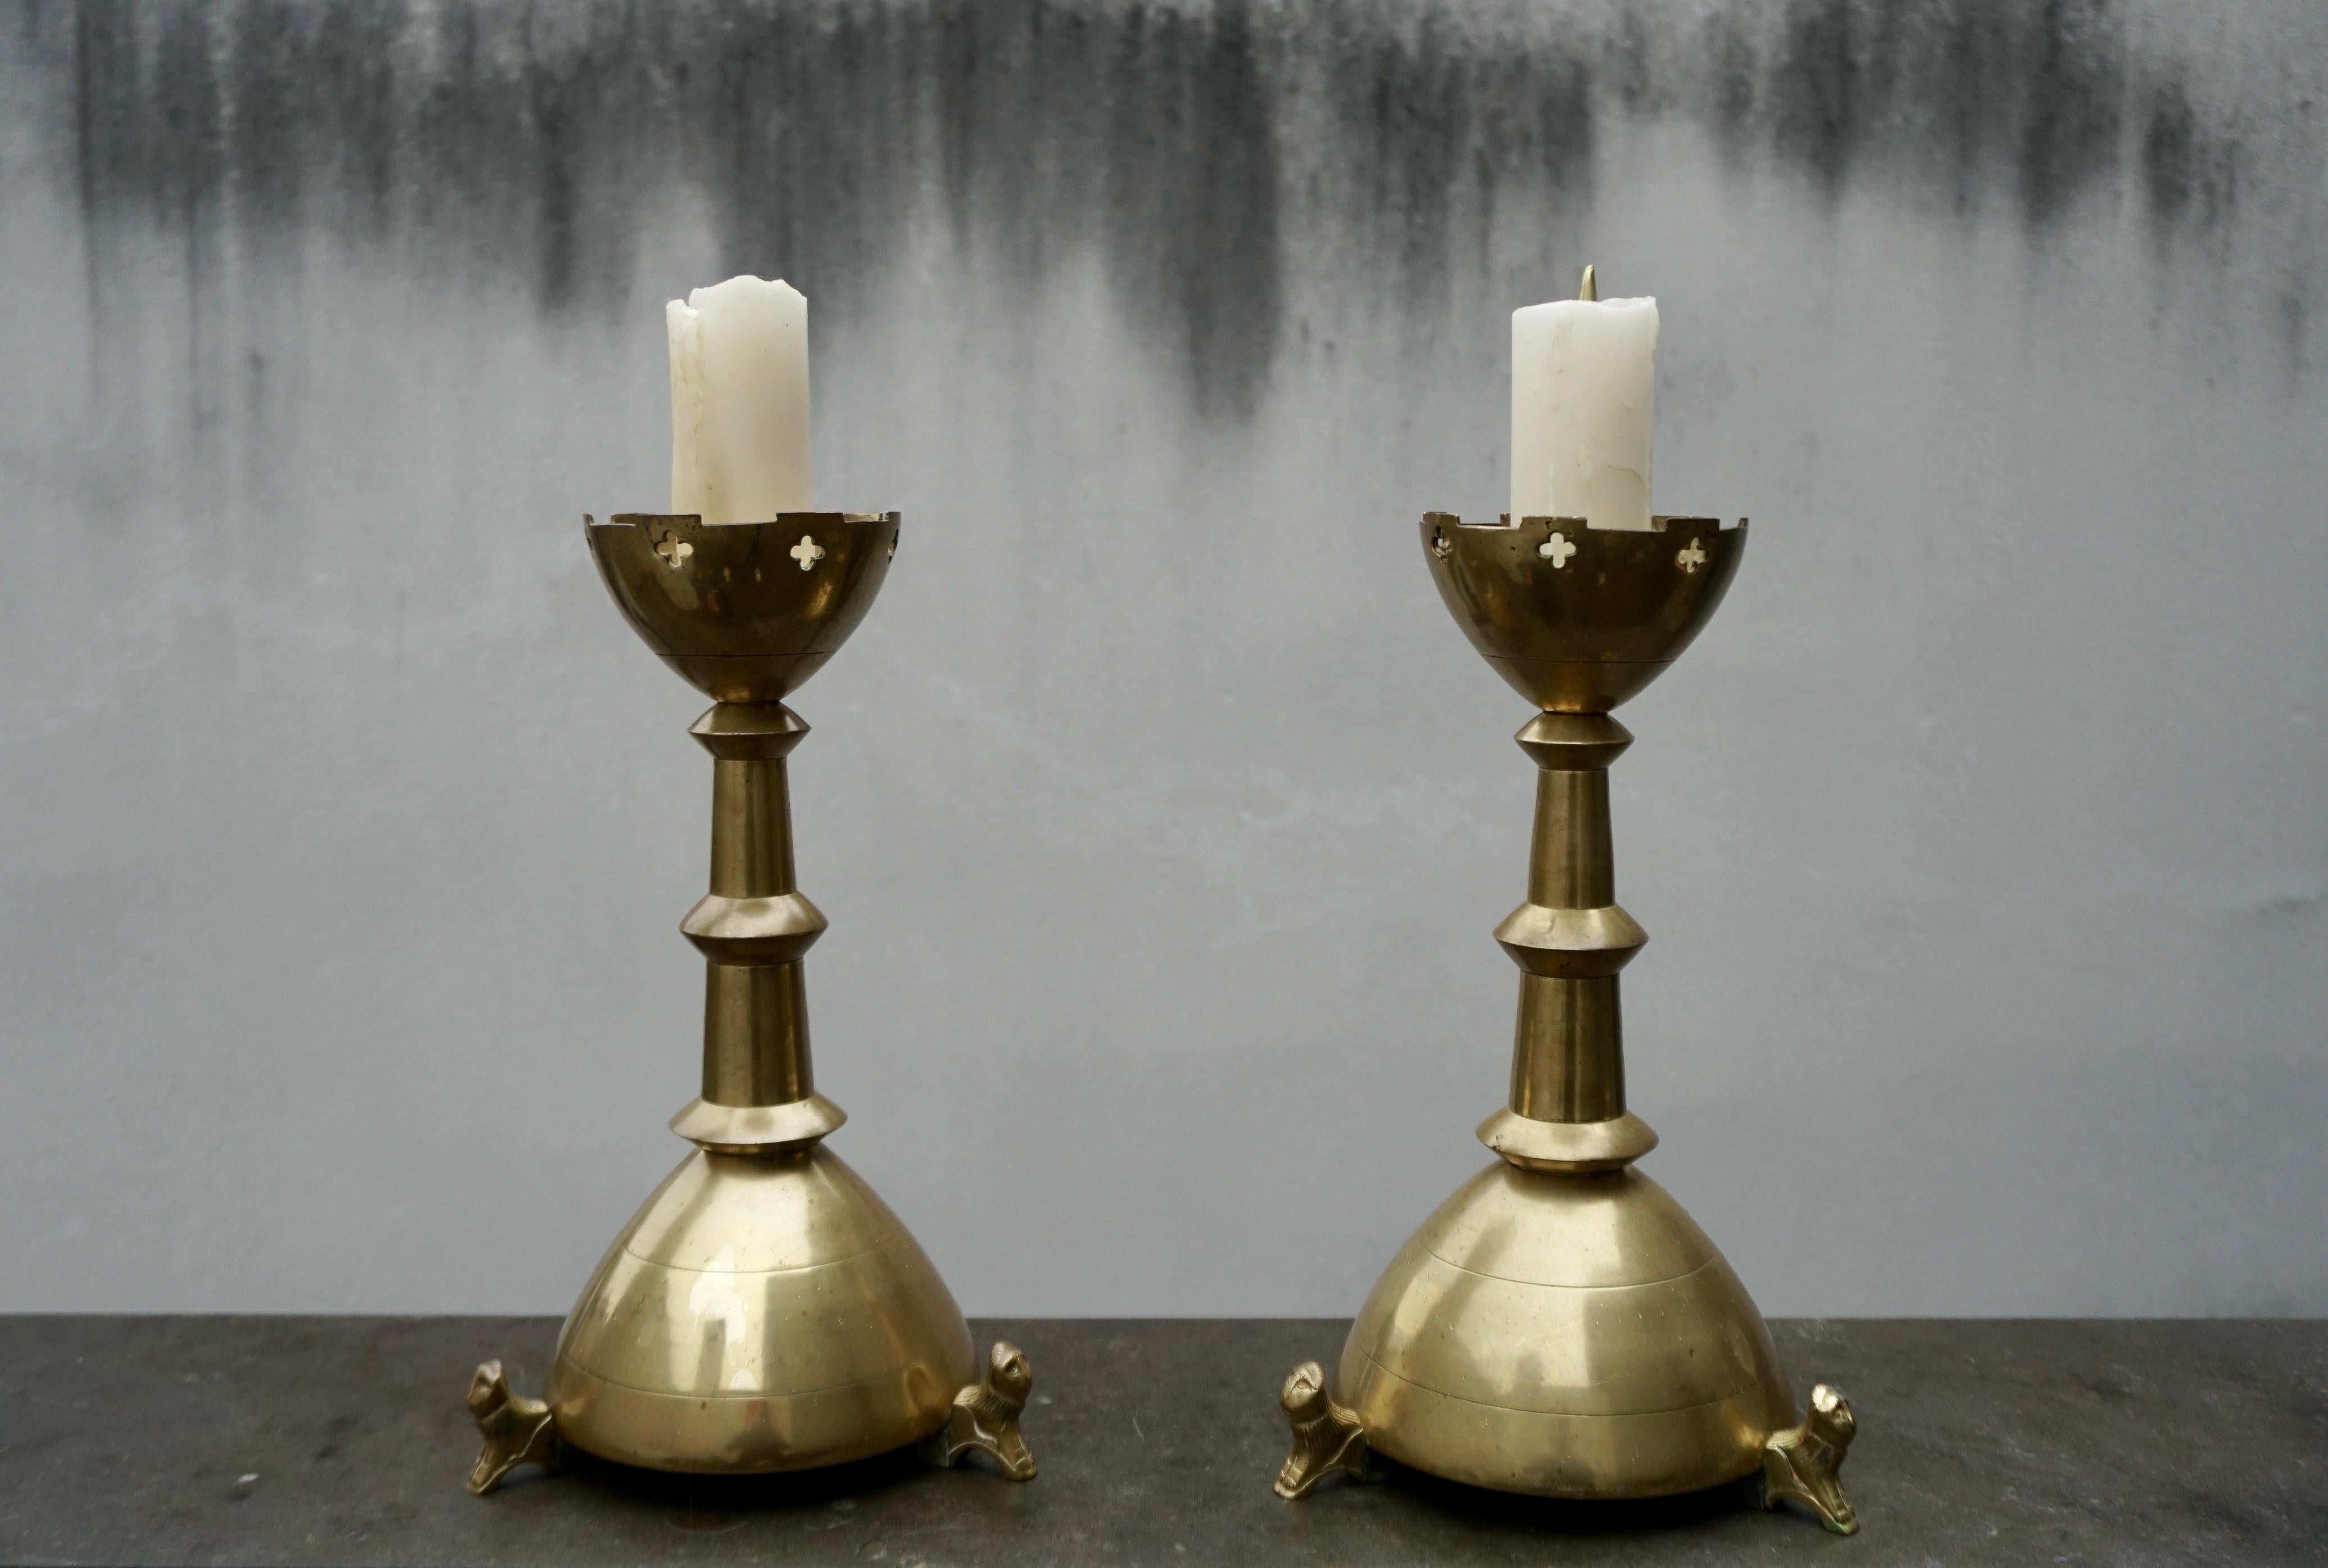 Rare and stunning pair of Flemish, Medieval Style candlesticks with crouching lions.  

If you are looking for the best quality and best condition antiques only then this rare pair could be perfect for your home or house of prayer. Because of their